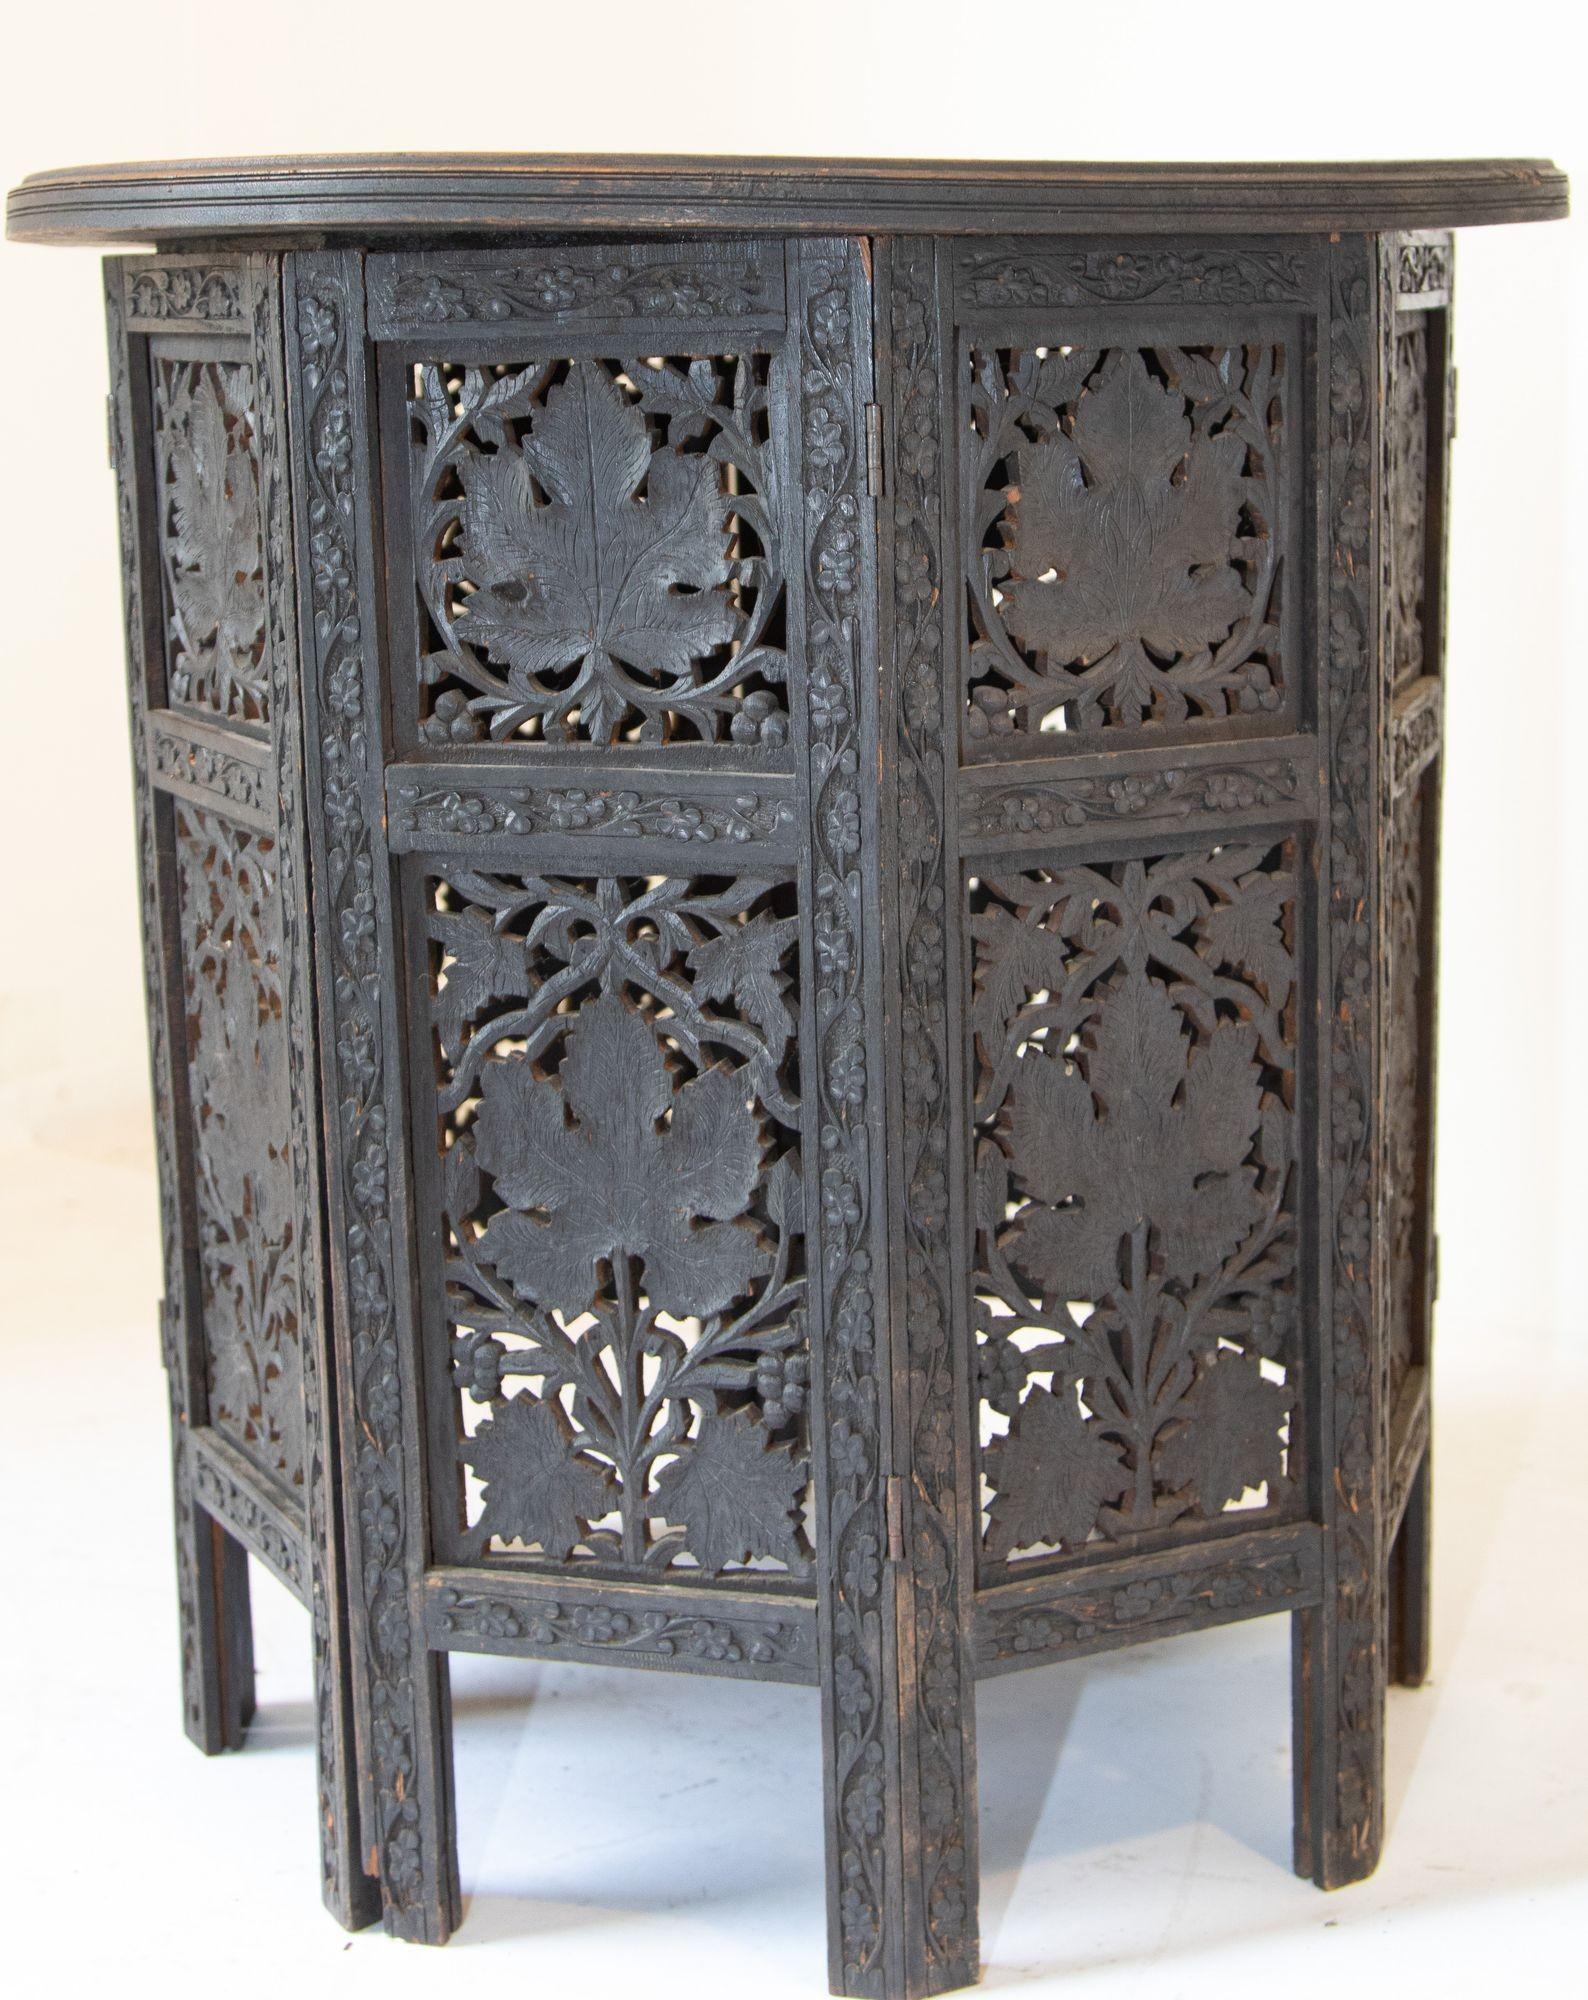 19th Century Intricately Carved Anglo-Indian Side Table In Fair Condition For Sale In North Hollywood, CA